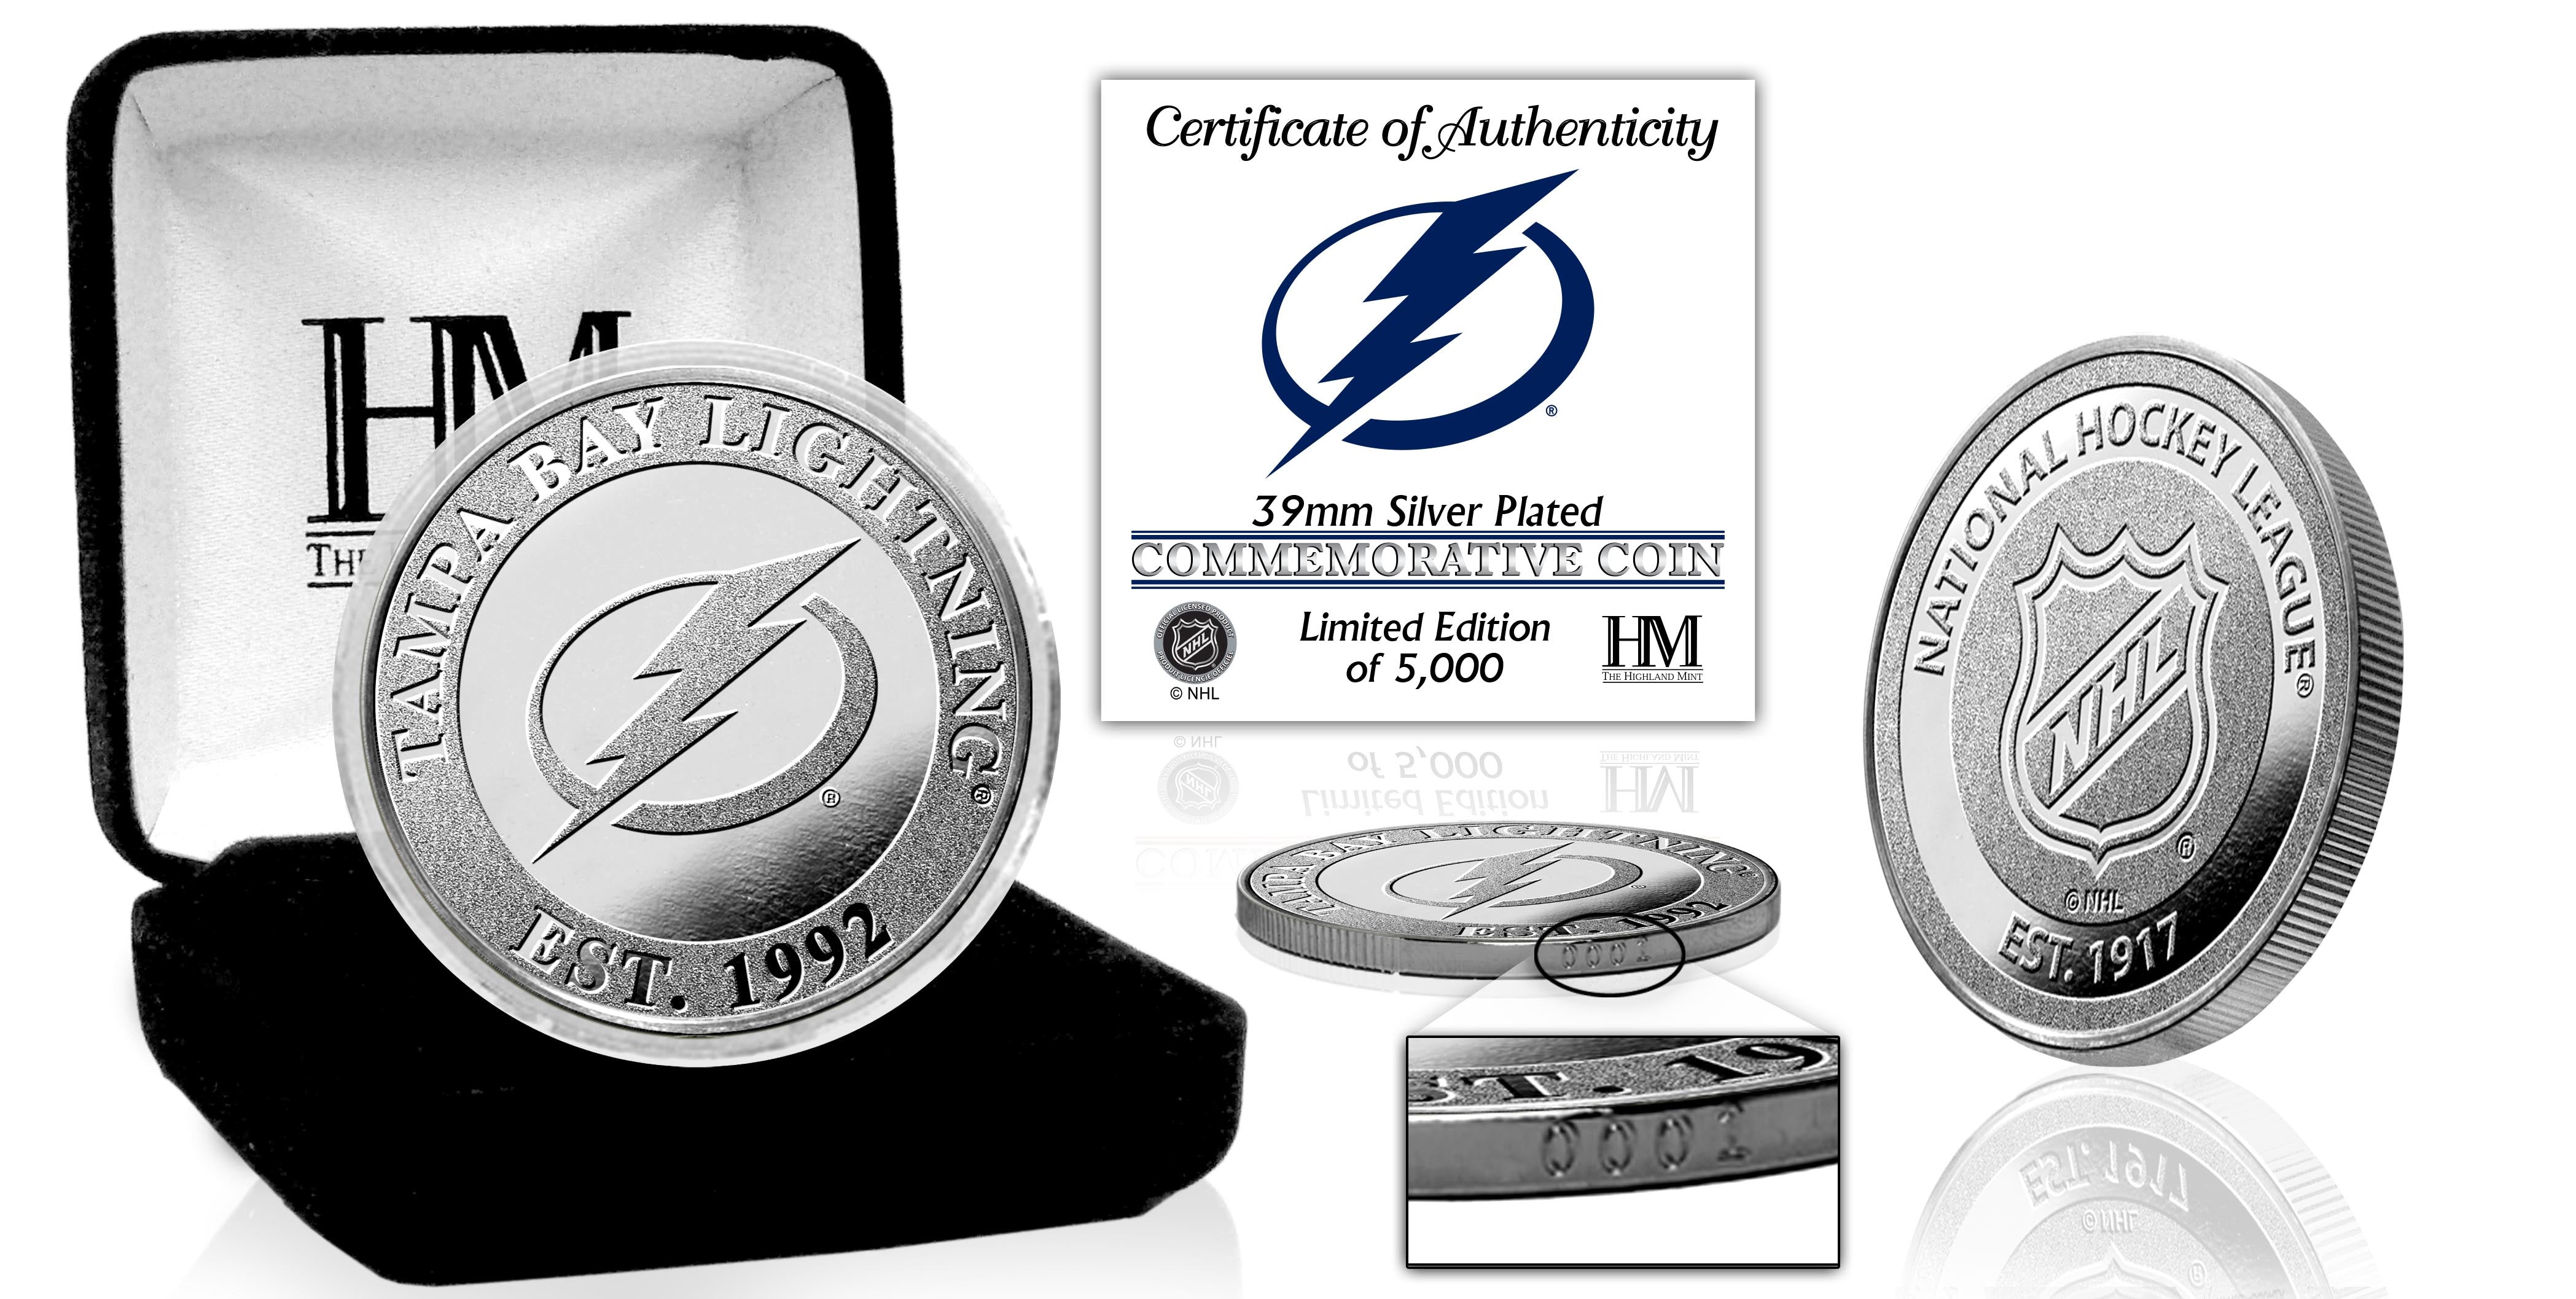 Tampa Bay Lightning Silver Mint Coin